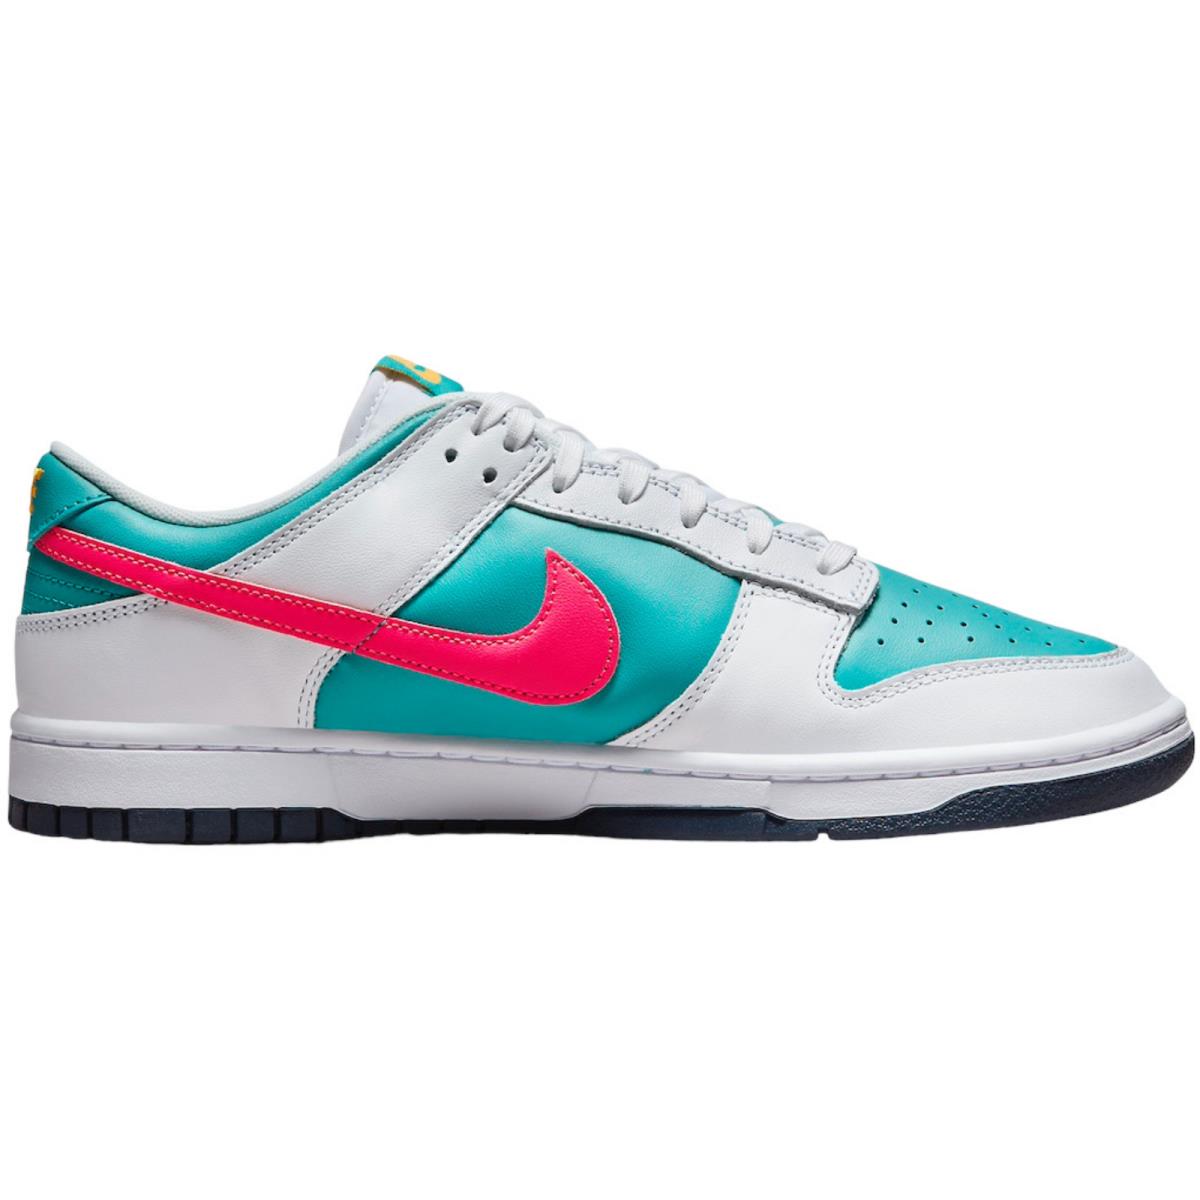 Nike Dunk Low Retro Men`s Casual Shoes All Colors US Sizes 7-14 Dusty Cactus/Thunder Blue/White